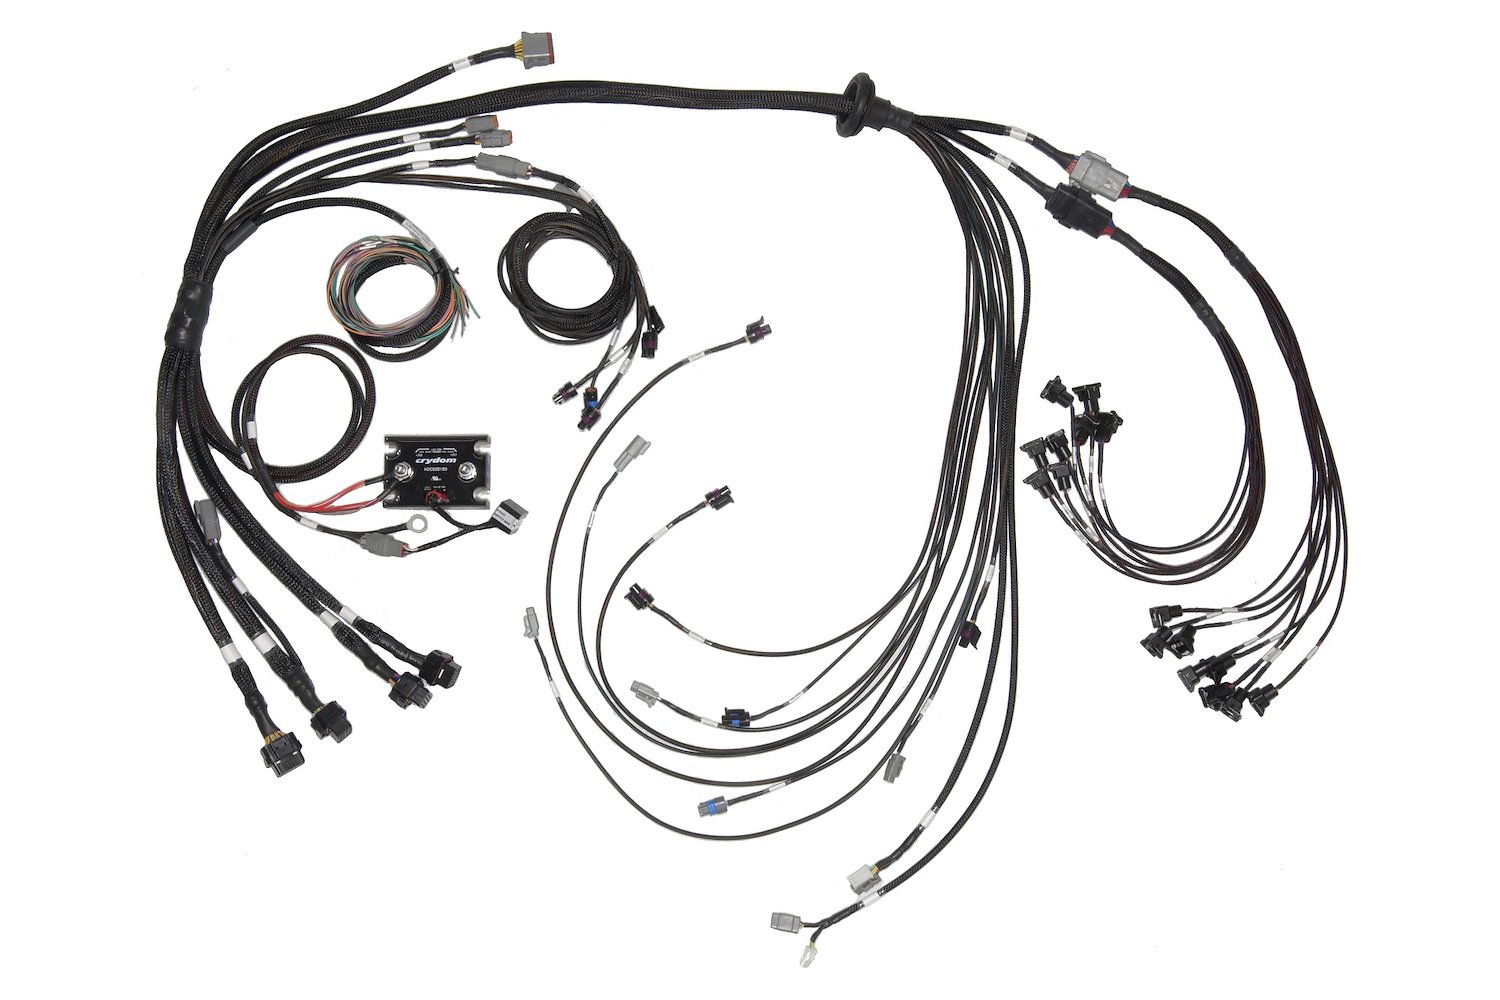 HT-142005 Elite 2500 & REM 16 Terminated Harness Only, GM SBC/BBC